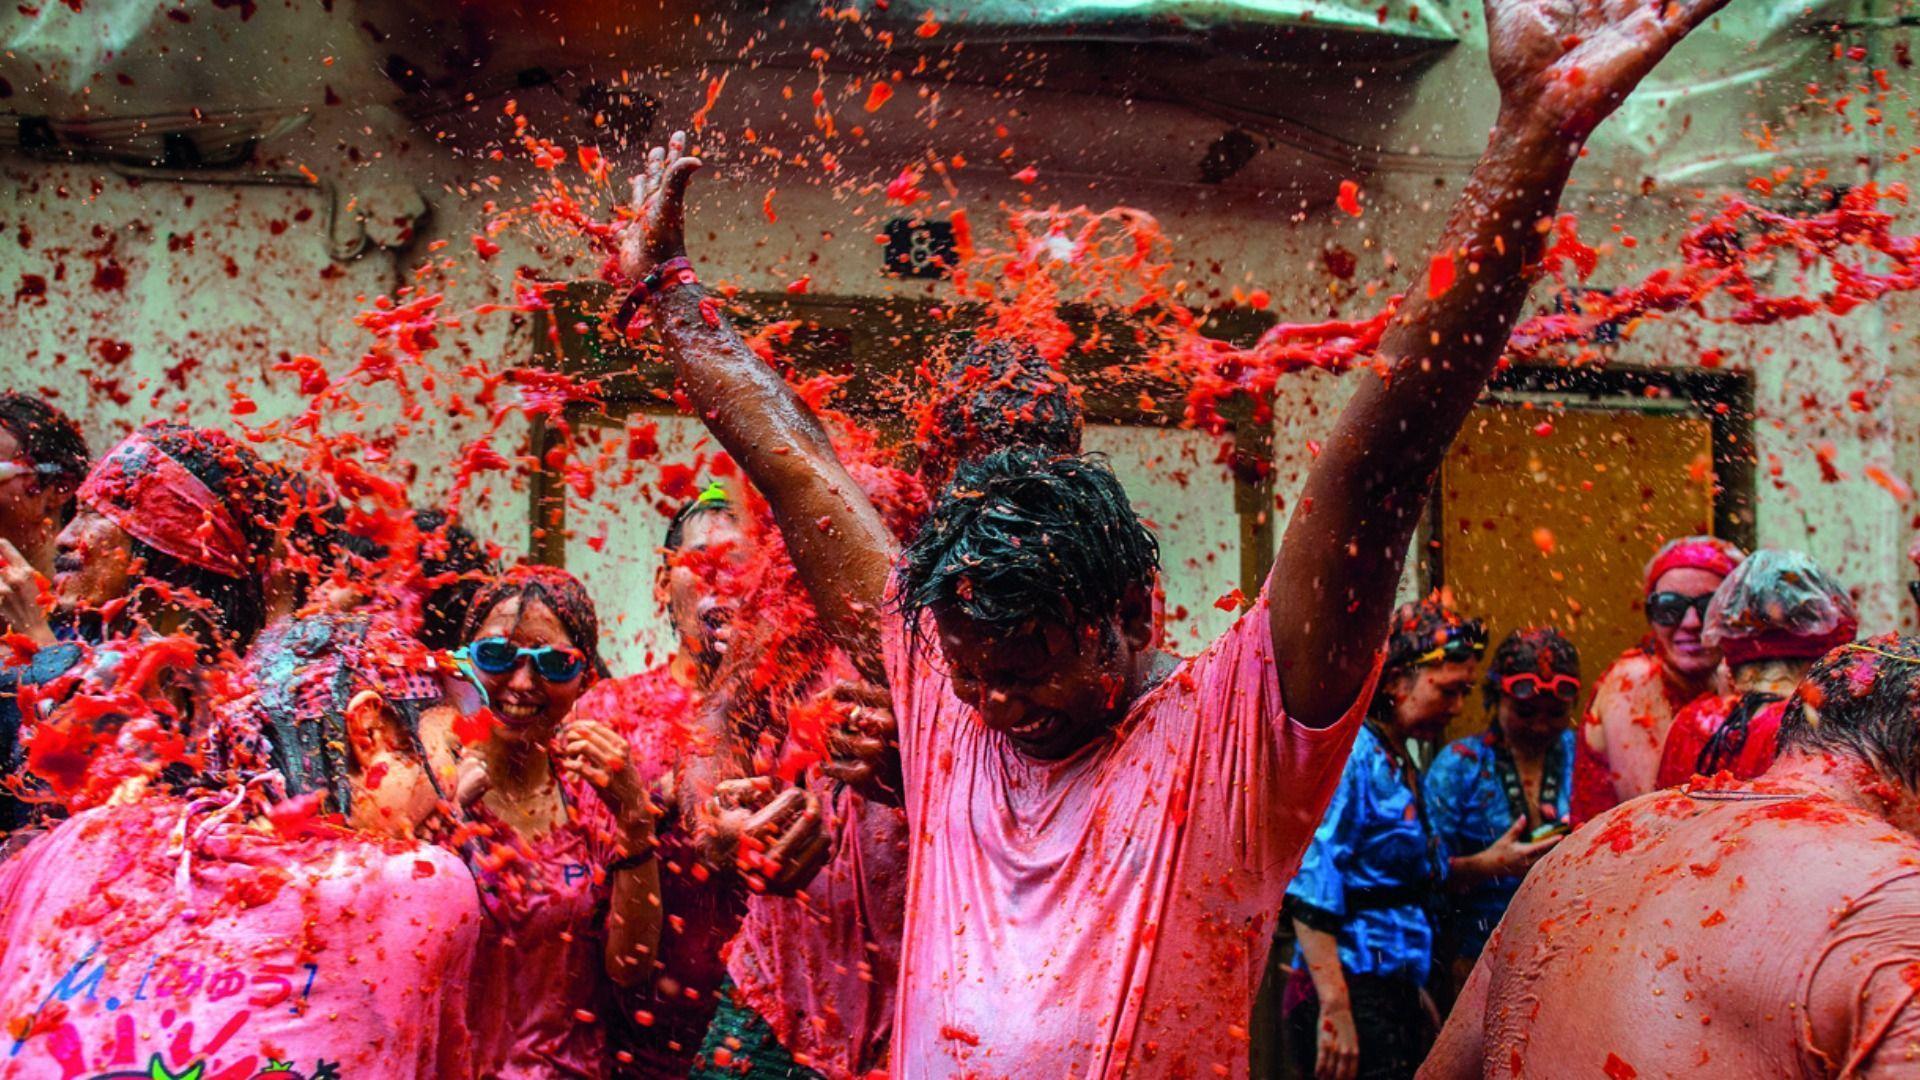 Spain: Tomatina festival celebrated with tomatoes fights